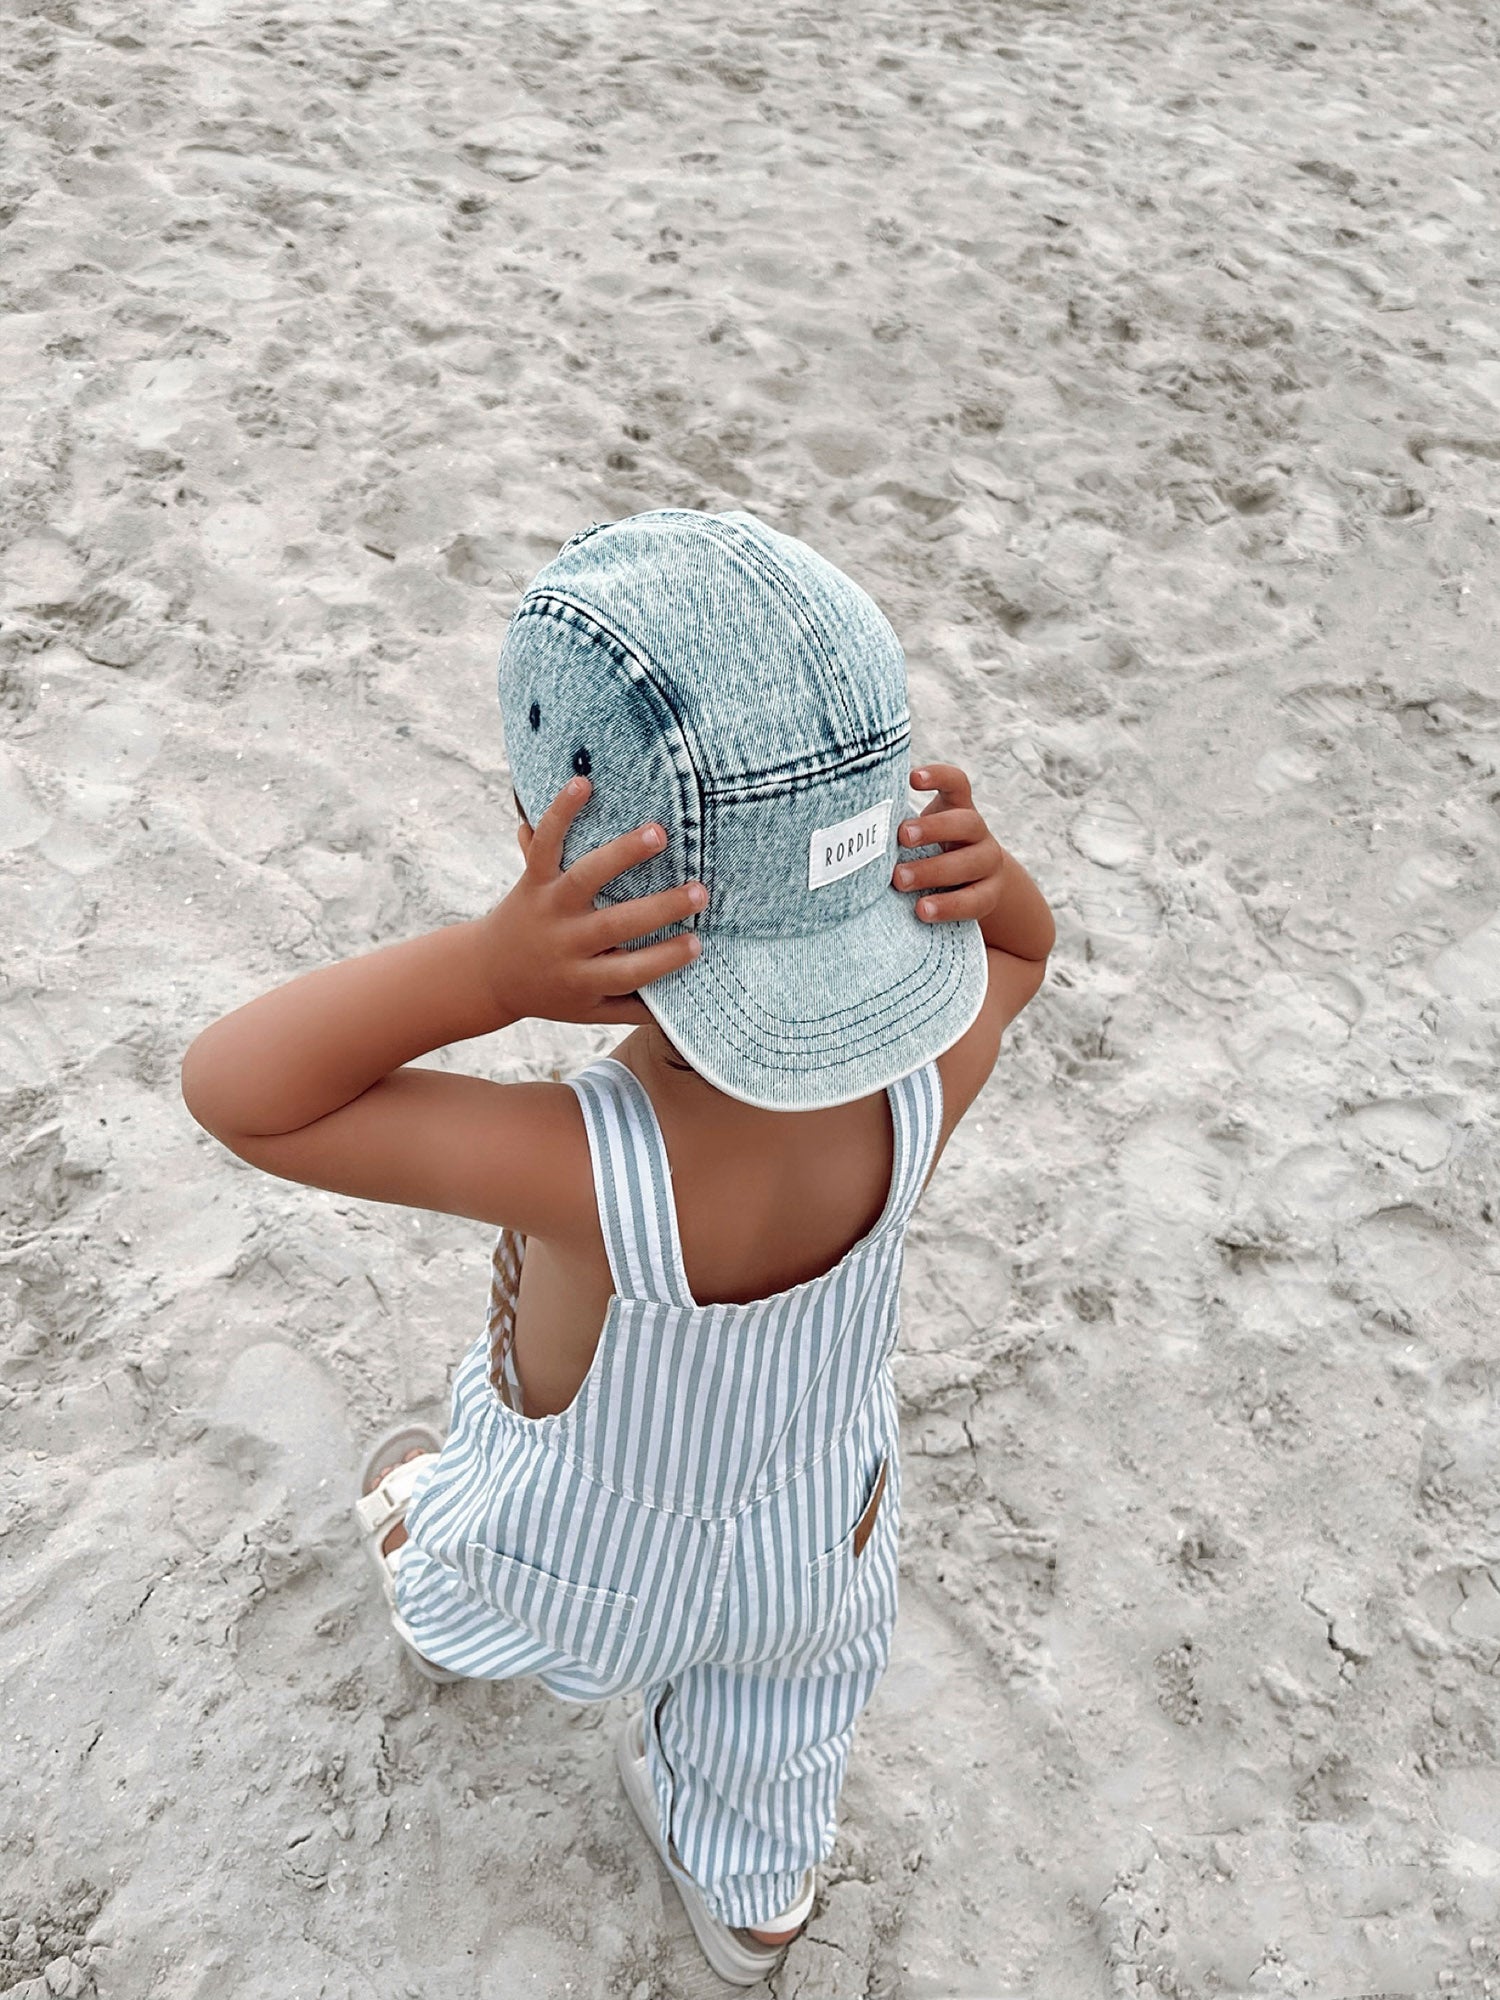 Denim Cap by Rordie in Blue ~ Baby, Toddler and Kids Hats